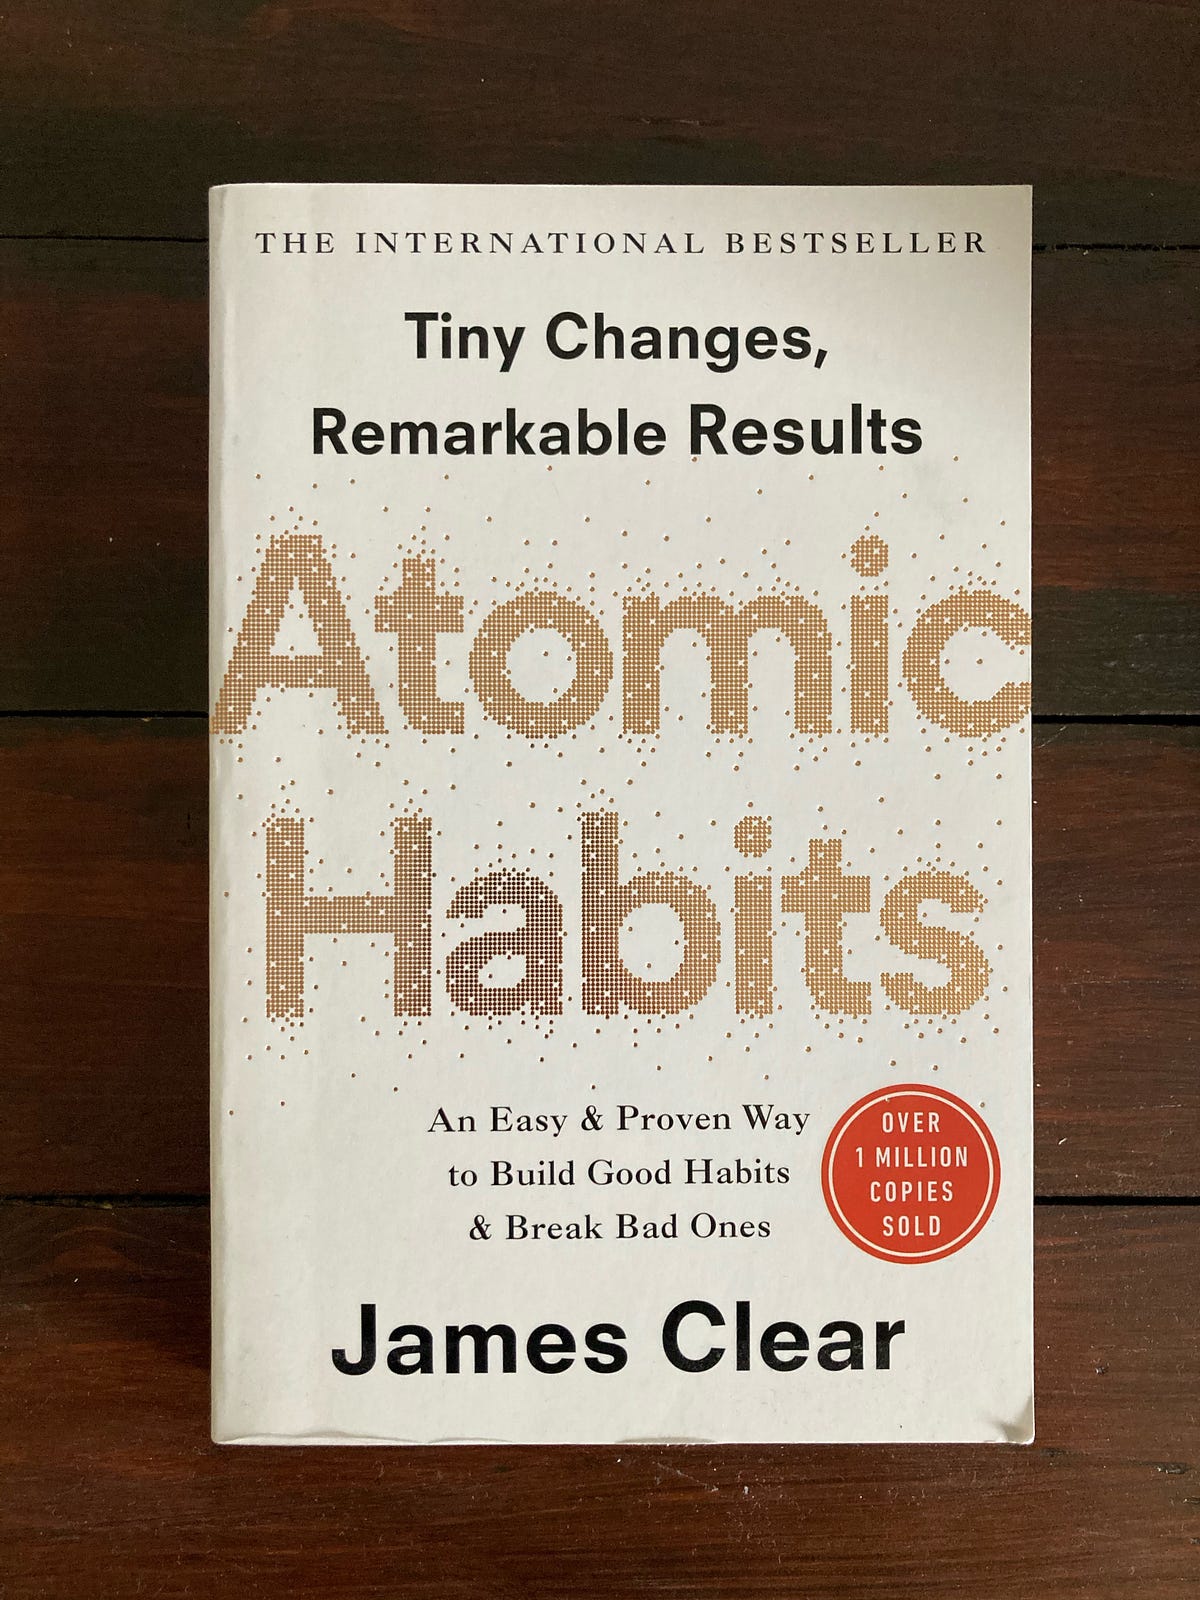 Atomic Habits,So Good They Can't Ignore You,Mindset,Deep Work 4 Book  Collection